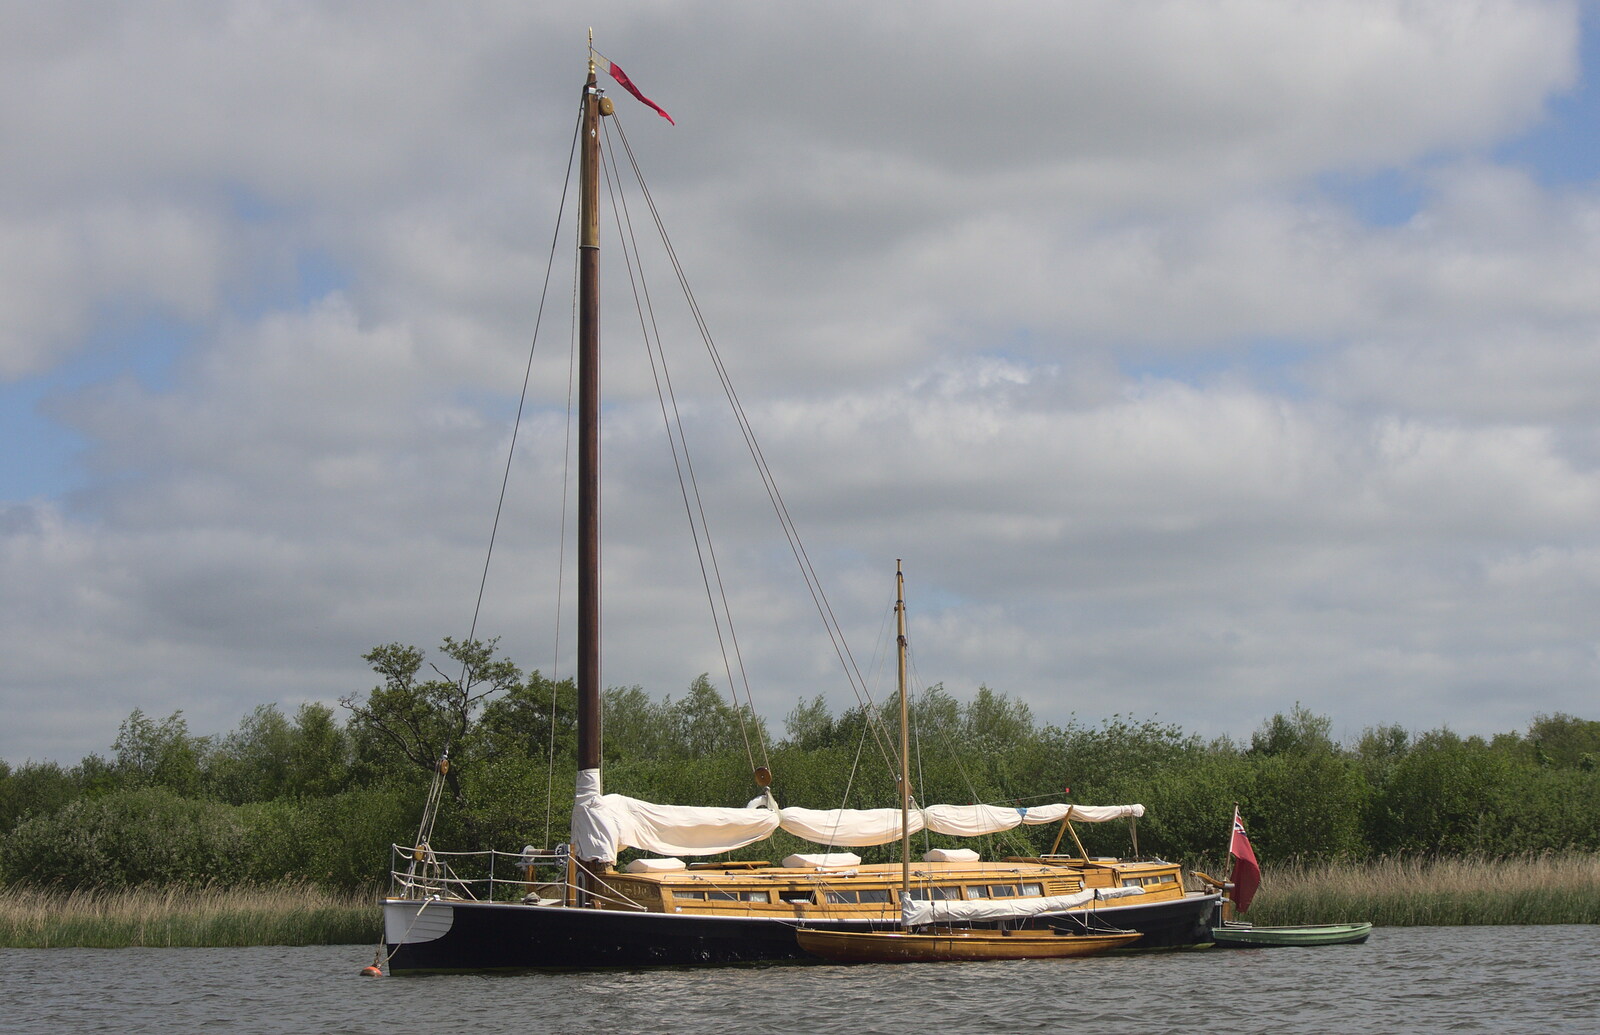 One of the last remaining Wherries - 'Solace' from A Trip on the Norfolk Broads, Wroxham, Norfolk - 25th May 2013